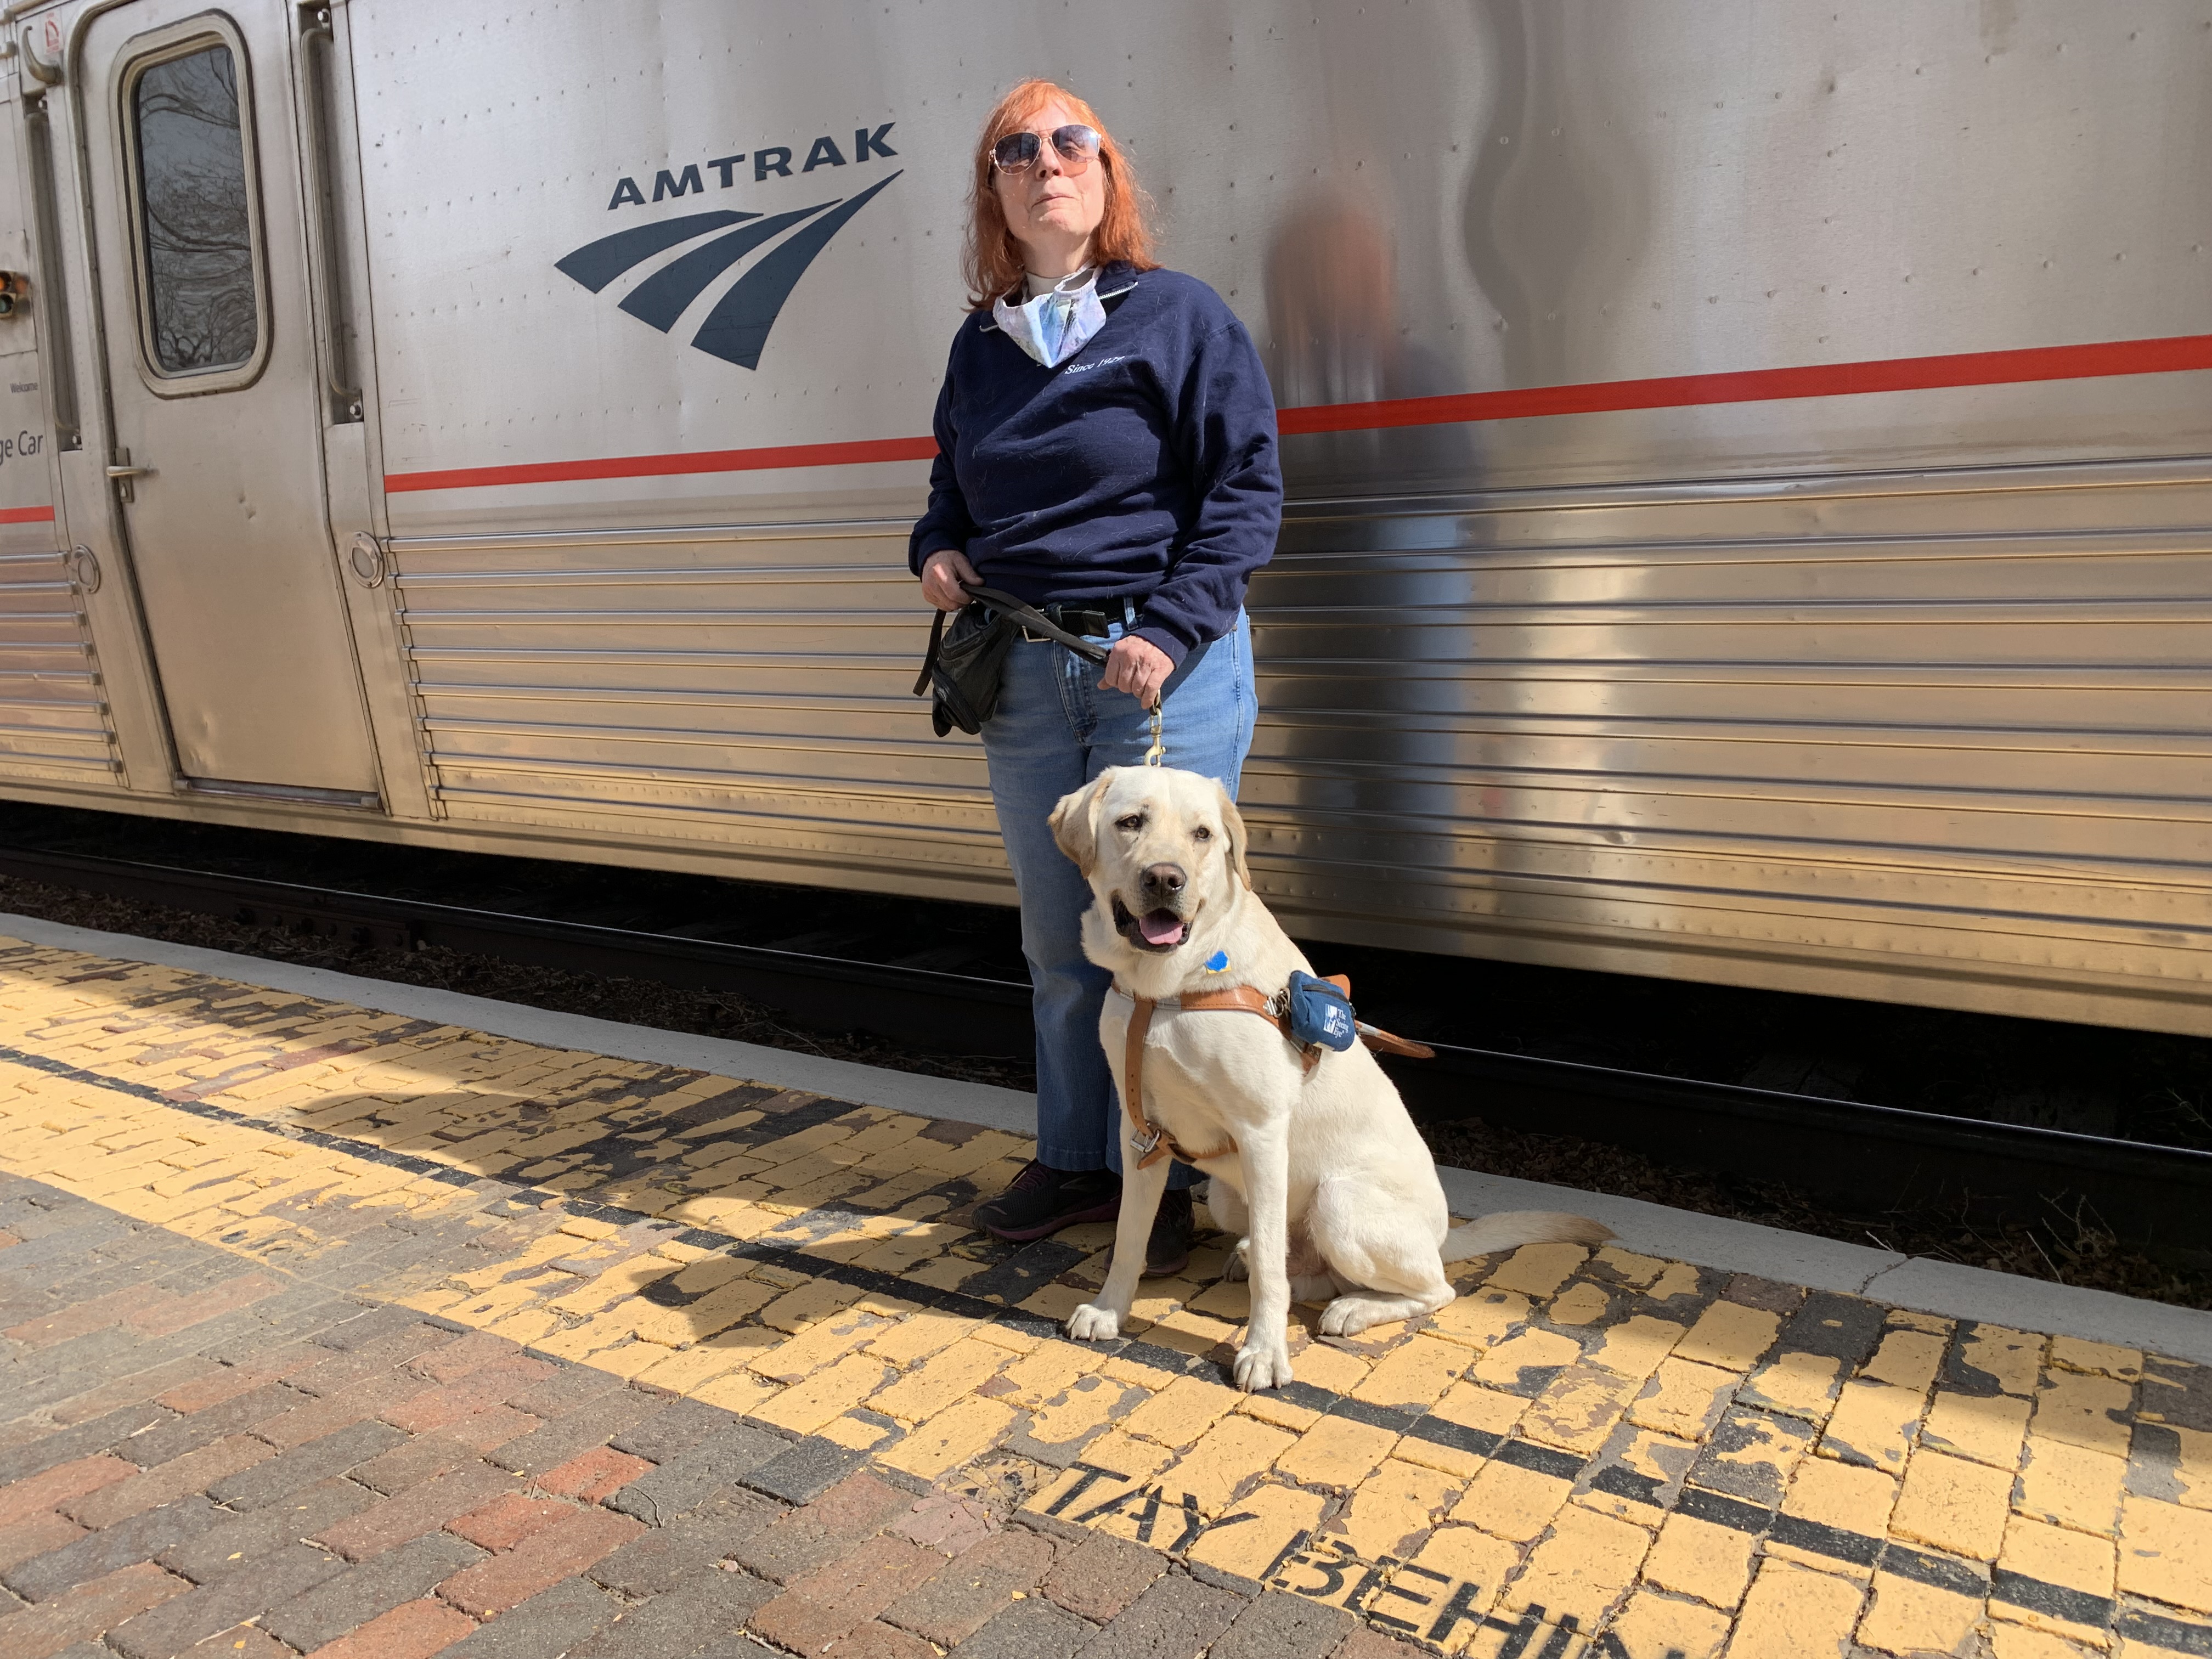 Karen stands with her new Seeing Eye dog on a platform in front of a gleaming Amtrak coach